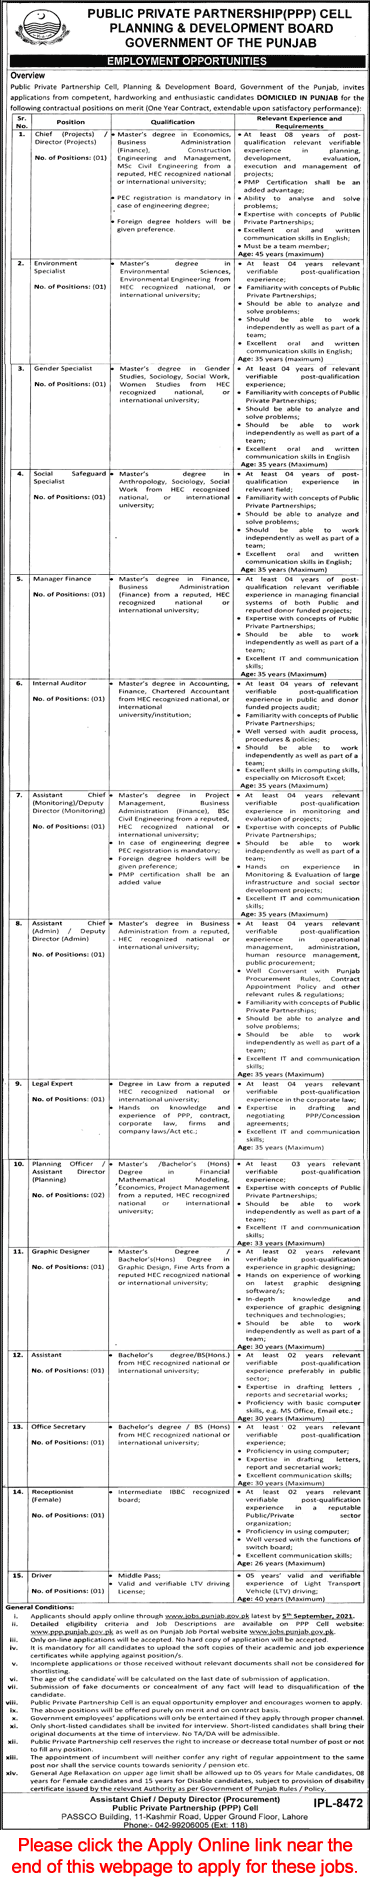 Planning and Development Board Punjab Jobs August 2021 Apply Online Public Private Partnership PPP Cell Latest